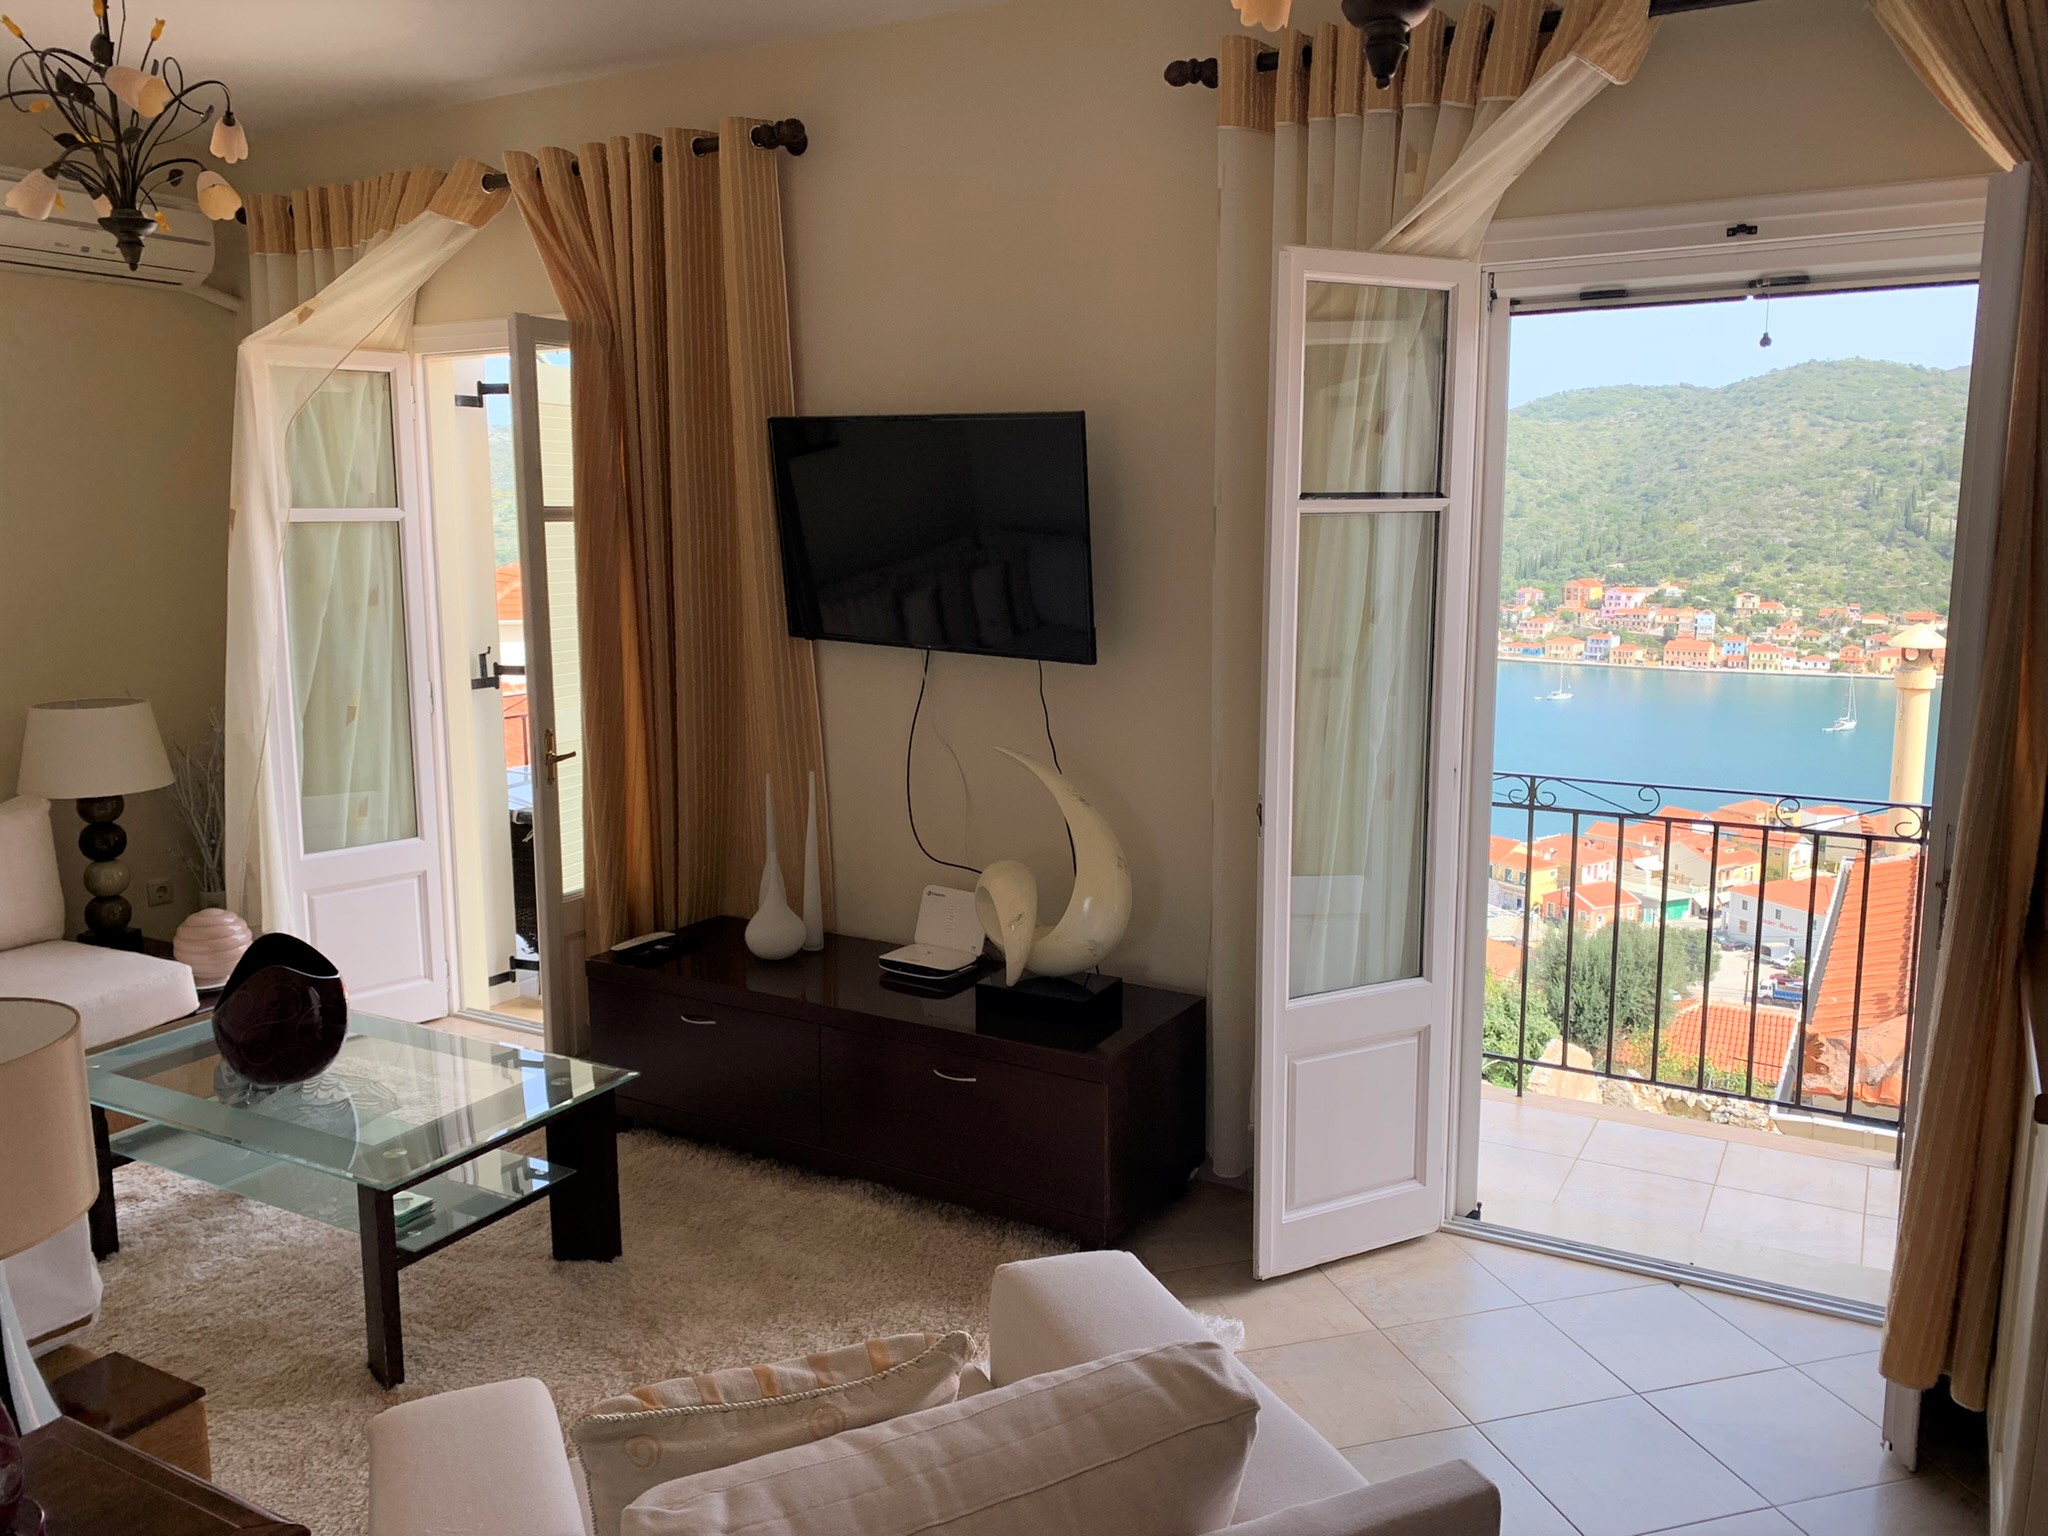 Living room and views of house for rent in Ithaca Greece, Vathi